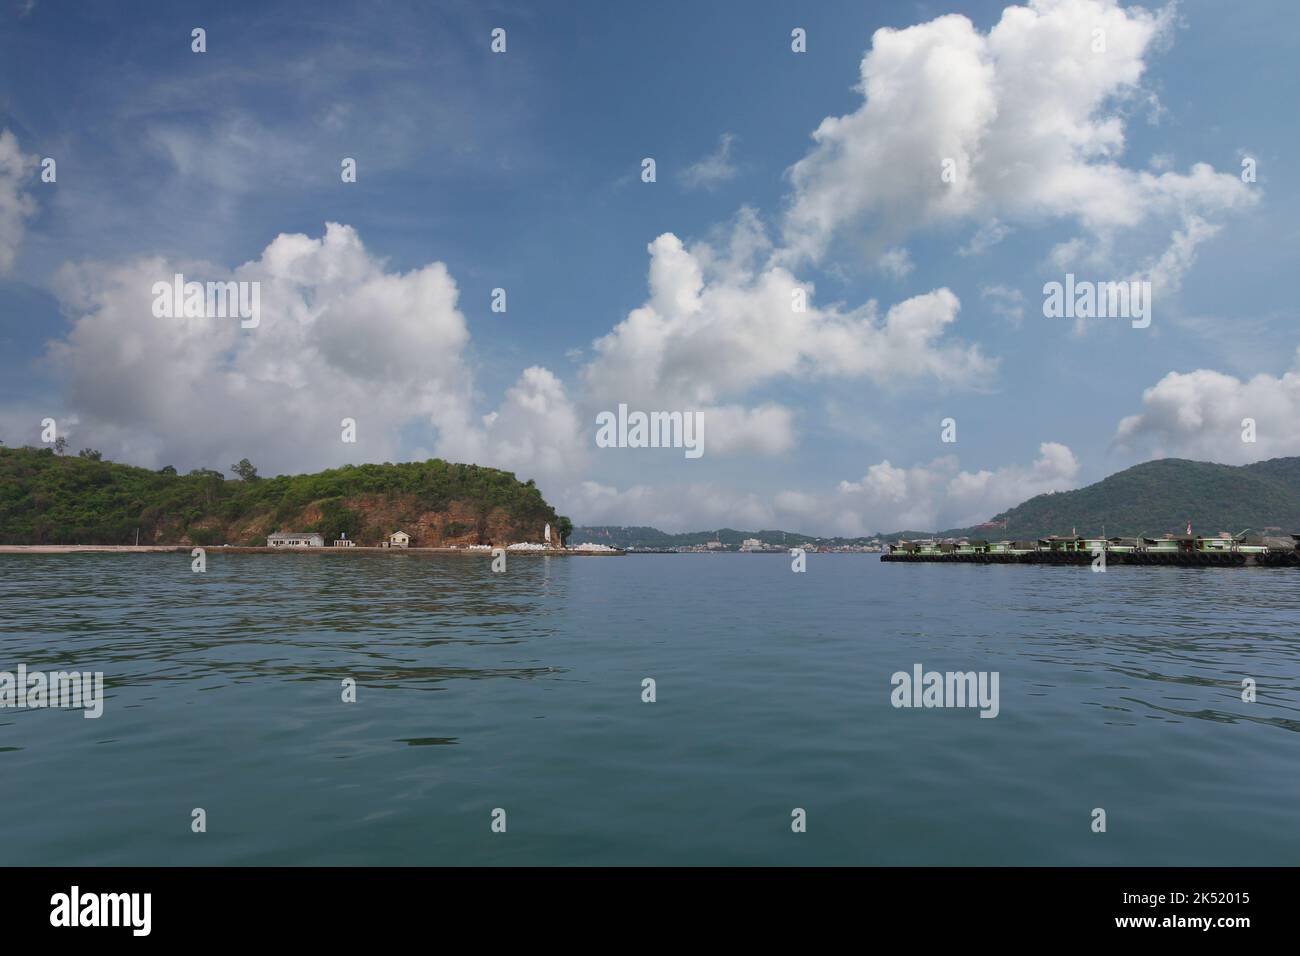 View of Koh Sichang, a popular tourist destination in Chonburi province, Thailand. Stock Photo